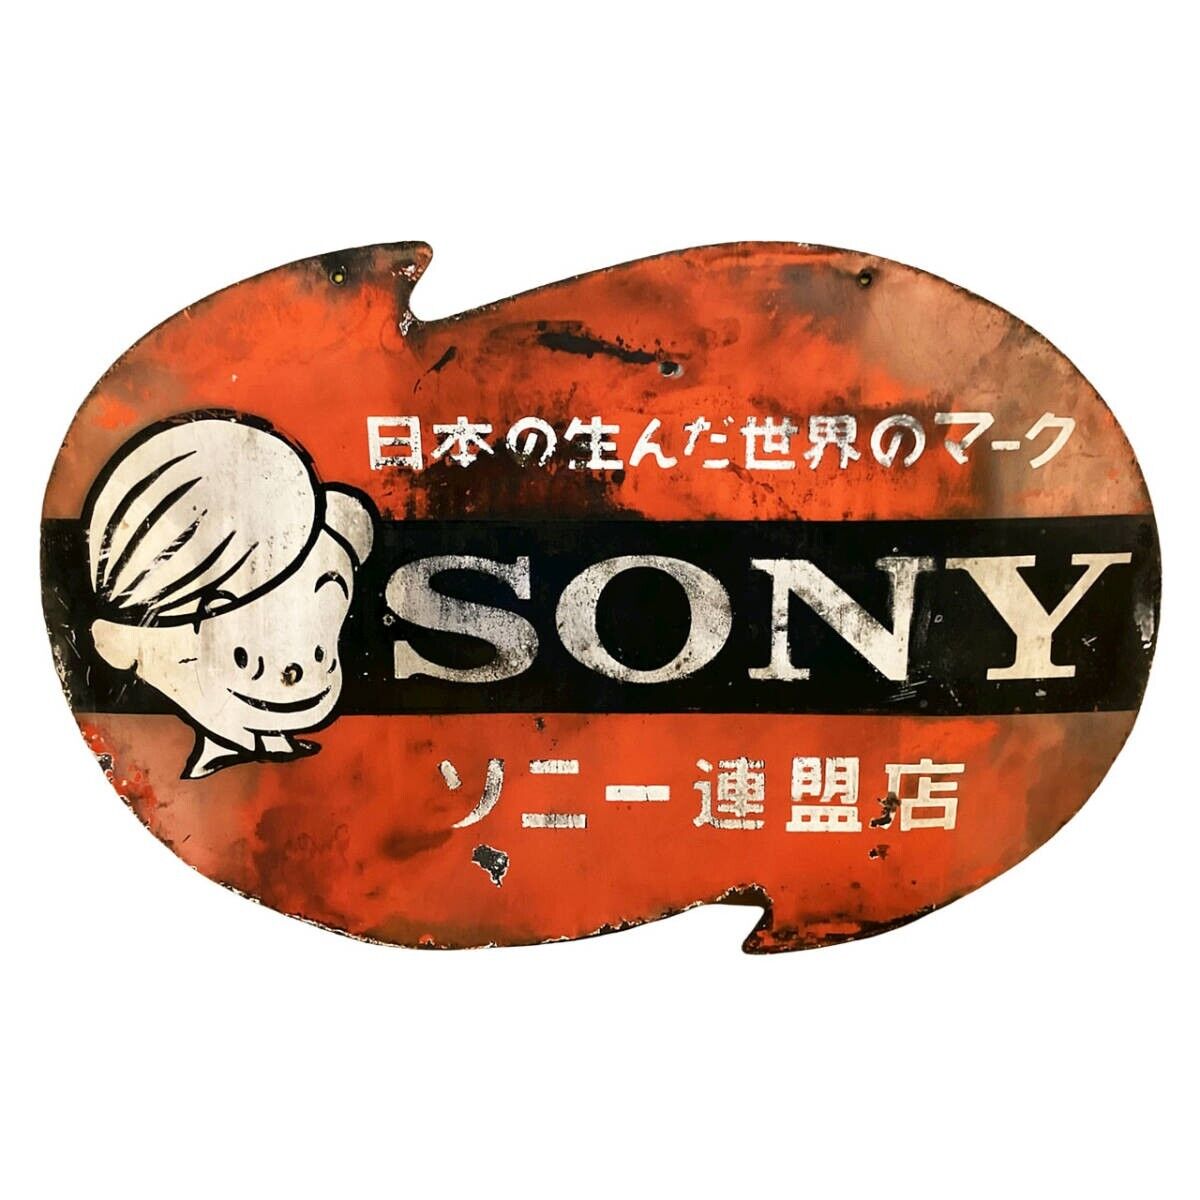 Sony Boy Signboard for Stores Two Sided Enamel Paint H55 × W85.2cm Vintage 1960s